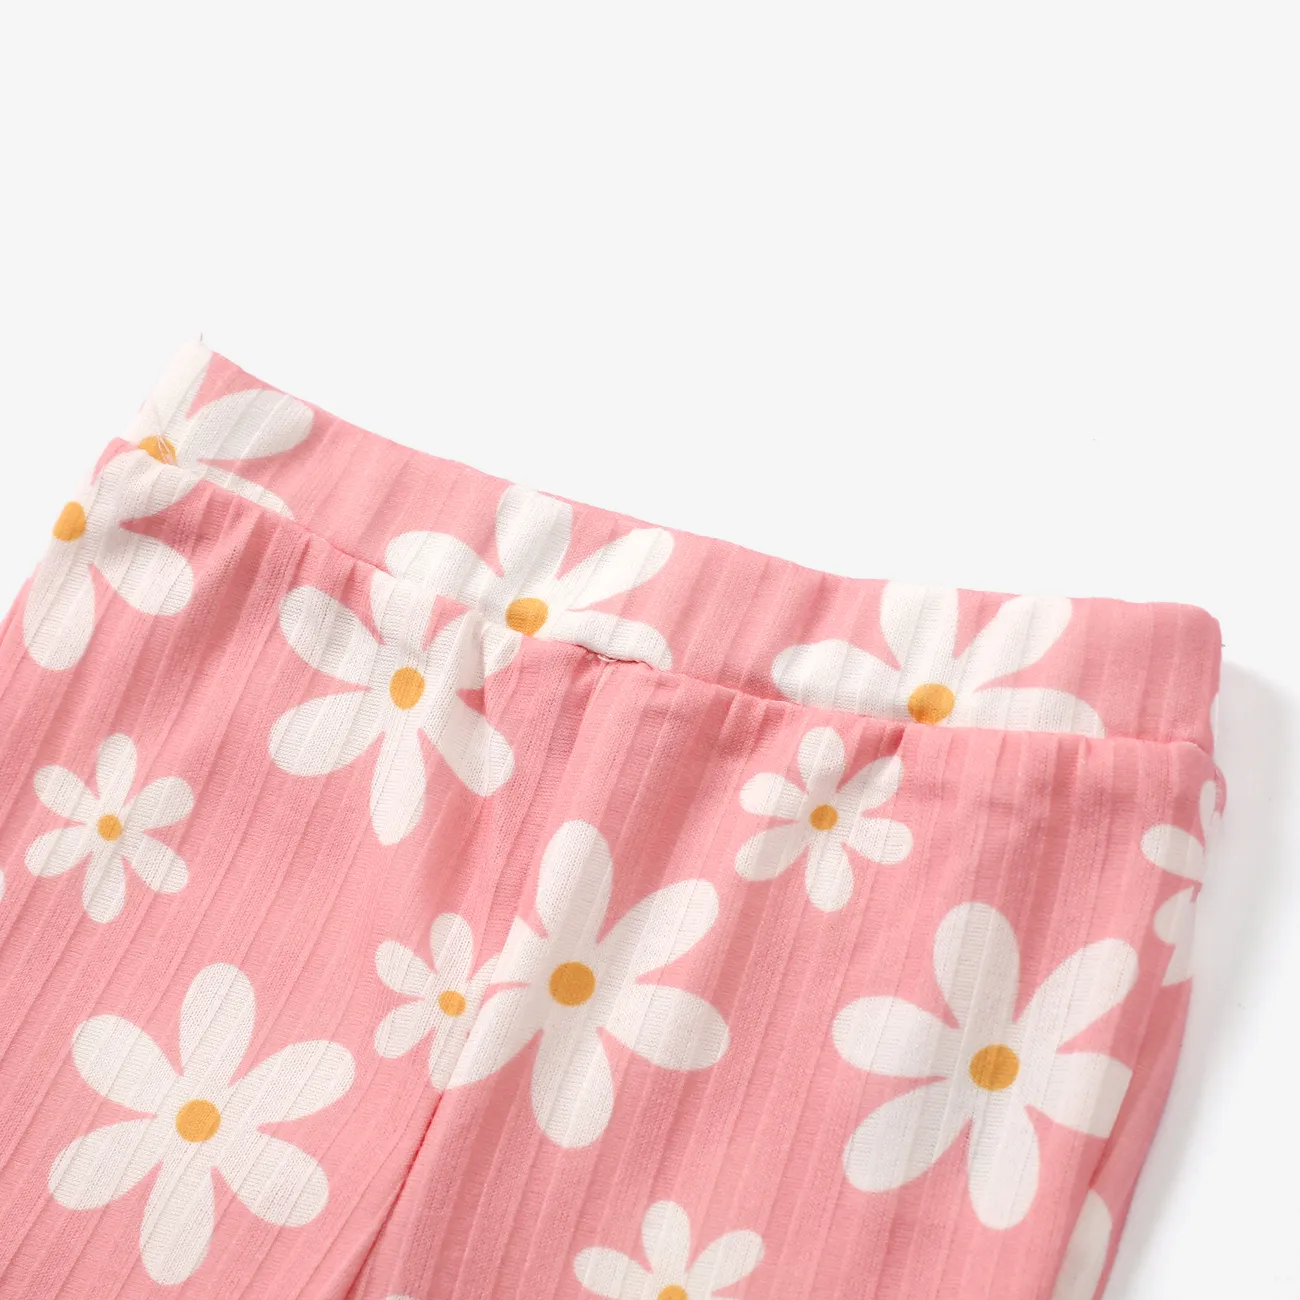 Baby Girl 3pcs Sweet Little Daisy 3D Top and Floral Print Flared Pants with Headband Set Pink big image 1